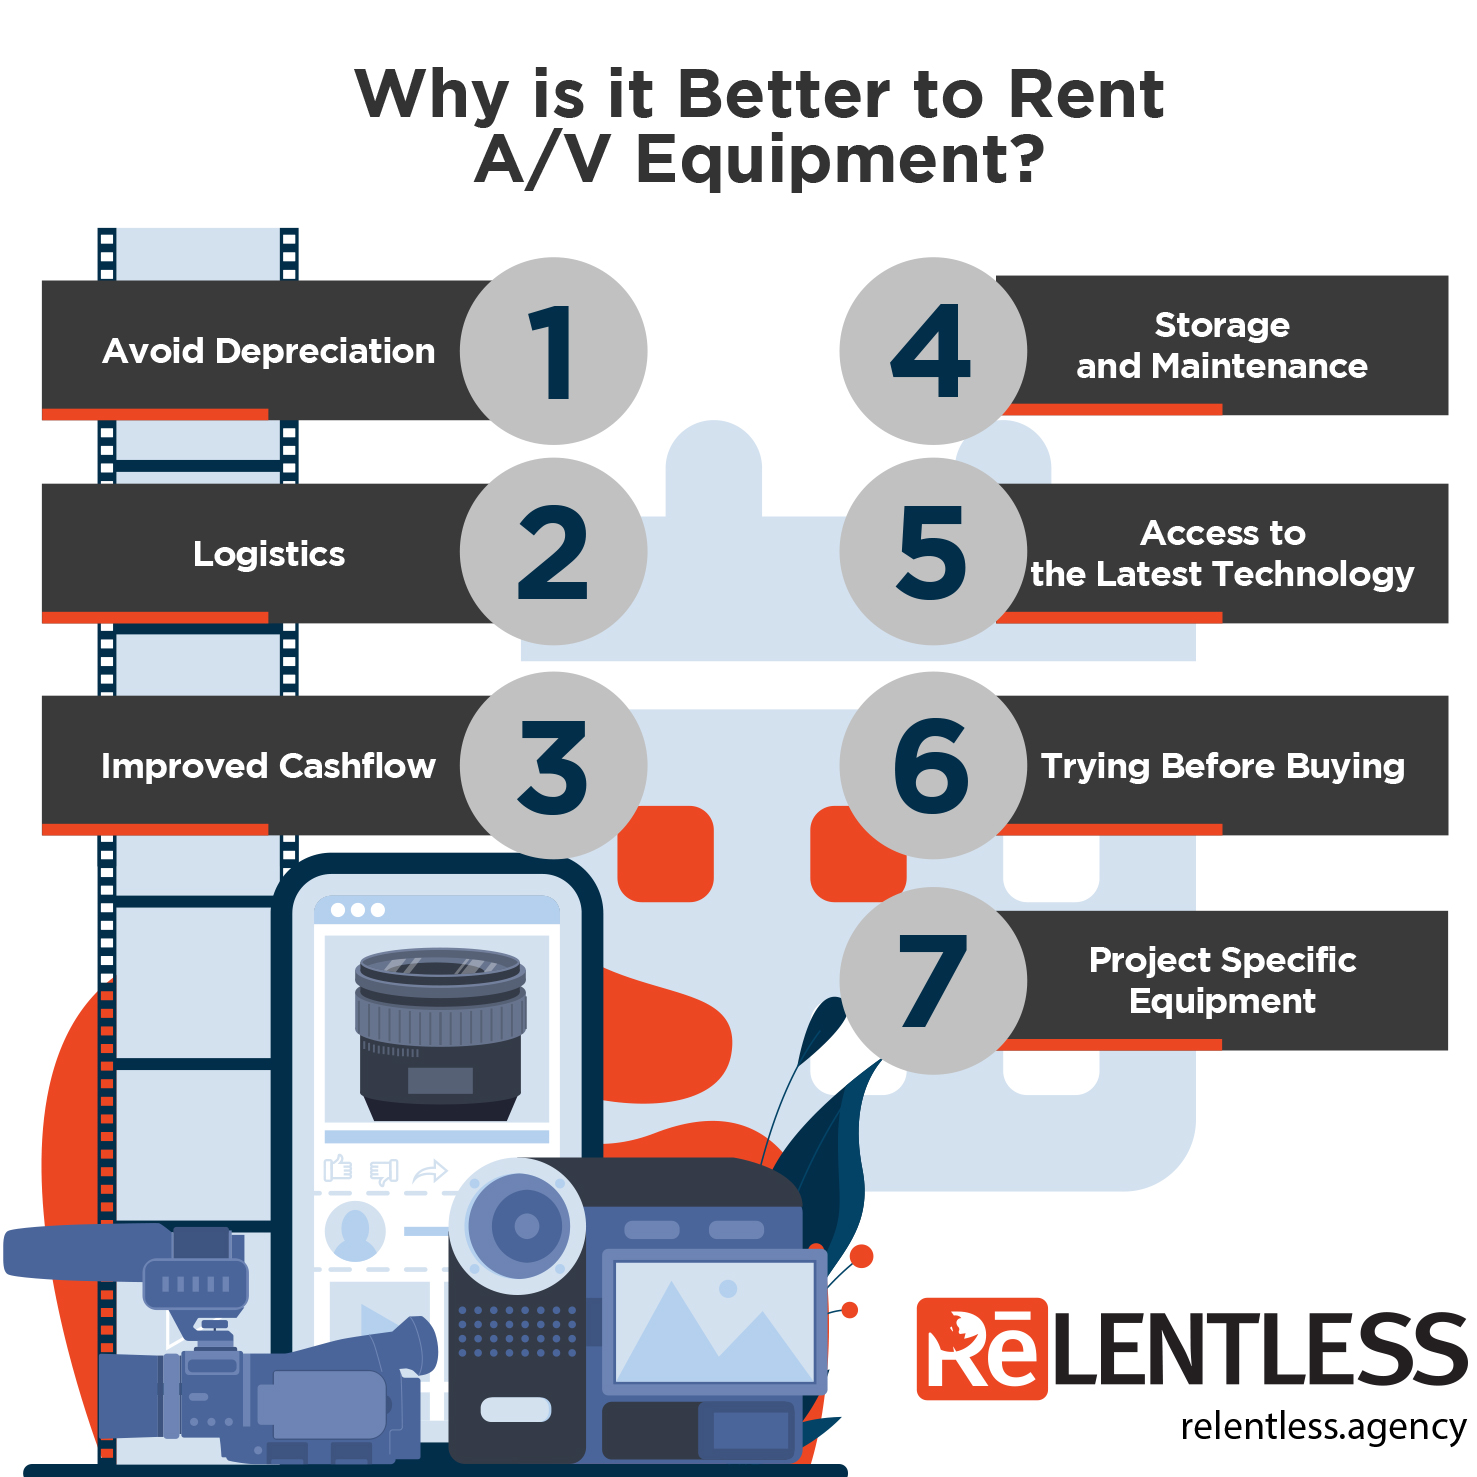 Why is it Better to Rent A/V Equipment?